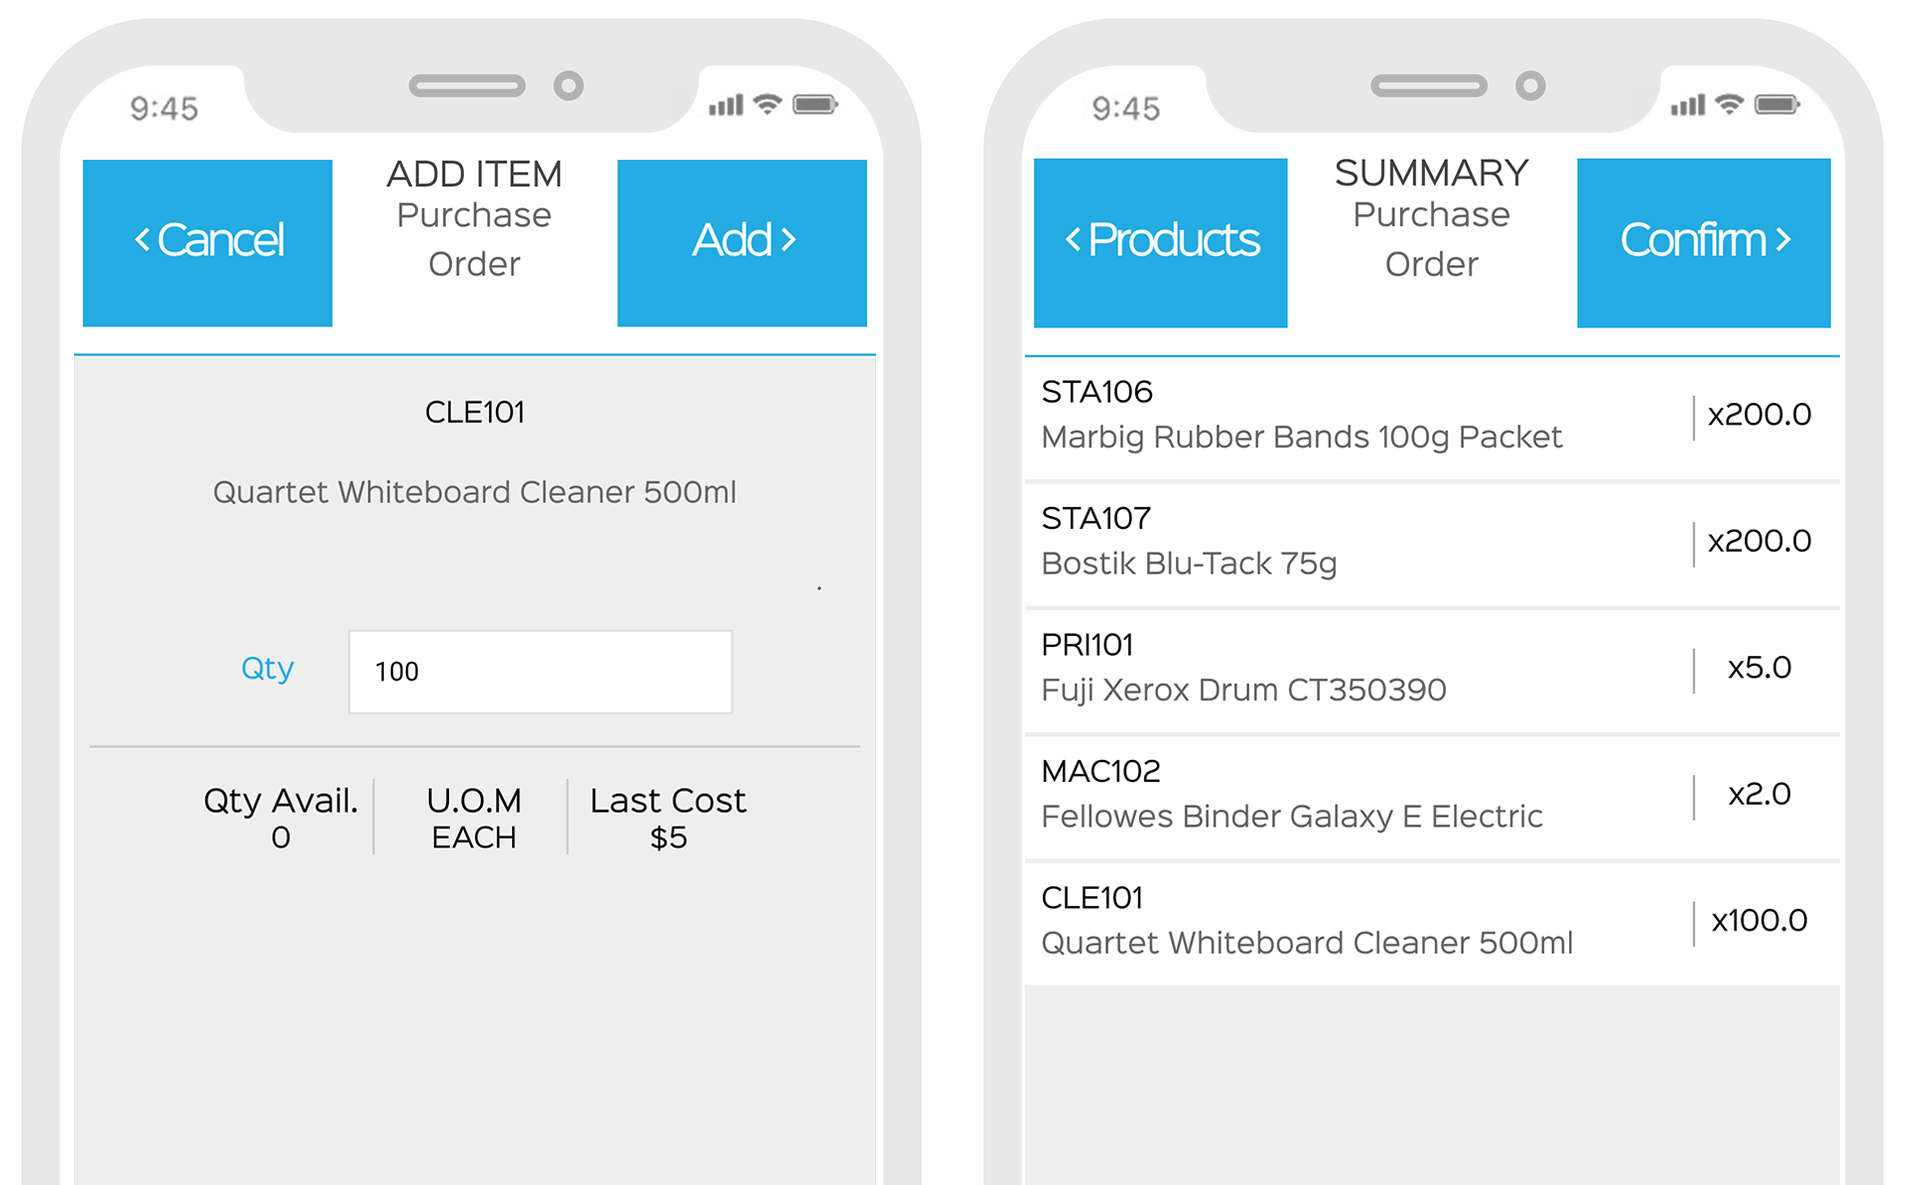  create purchase orders in the EZEMobile app by barcode scanning products